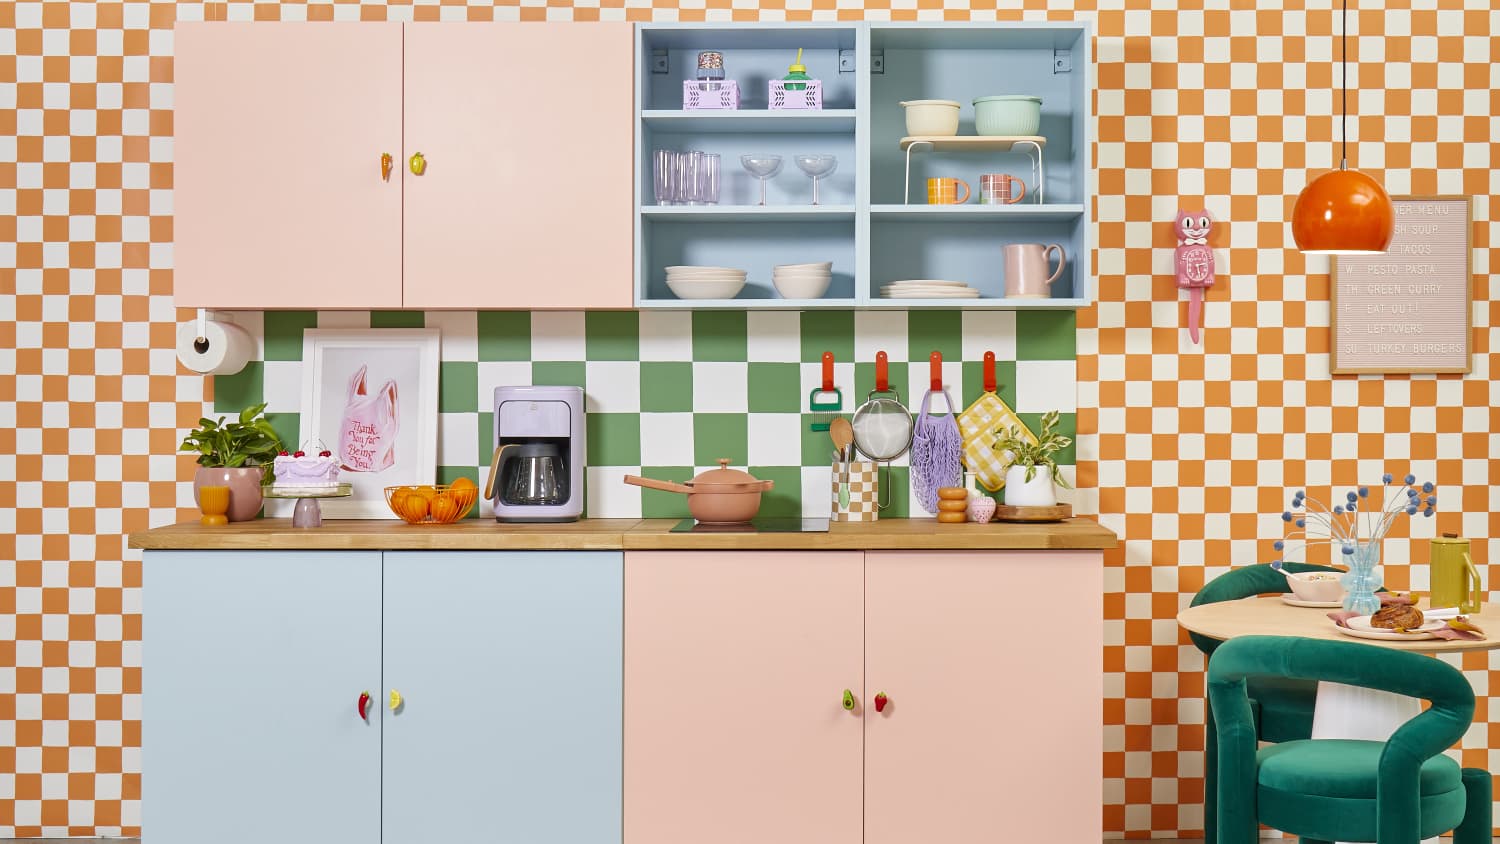 Discover the KAWAII style TREND in Interiors and Design